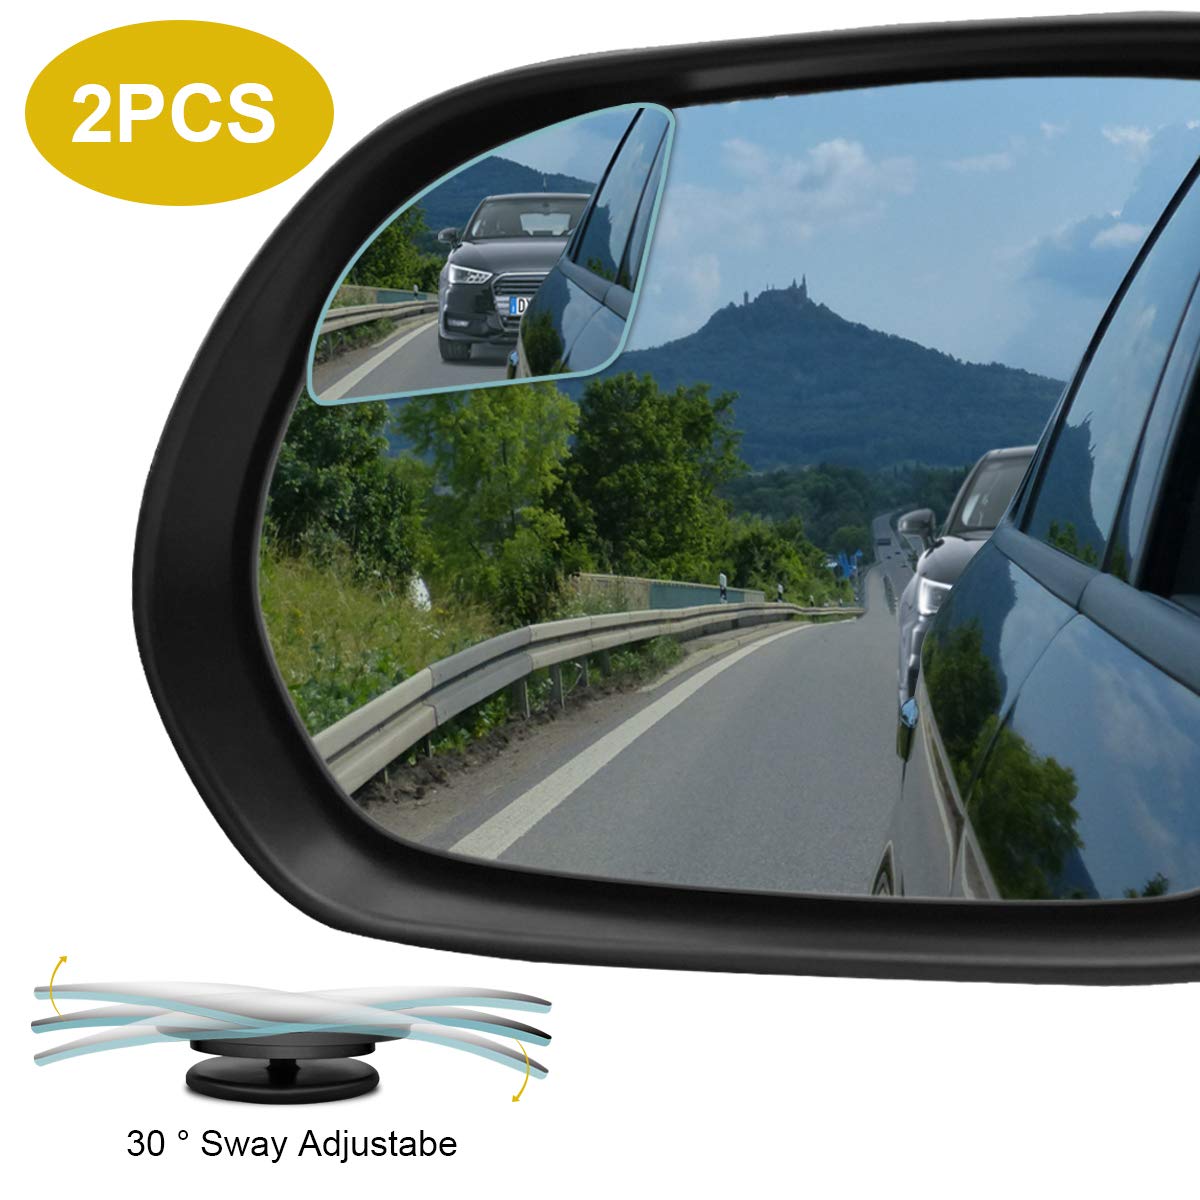 POMFW Blind Spot Mirror, Rearview Convex Side Mirrors for Cars SUV Truck  Van Stick on 3M Adhesive, Rear View HD Glass Frameless Sway Rotate  Adjustable Wide Angle, 2 inch Round 2pcs :